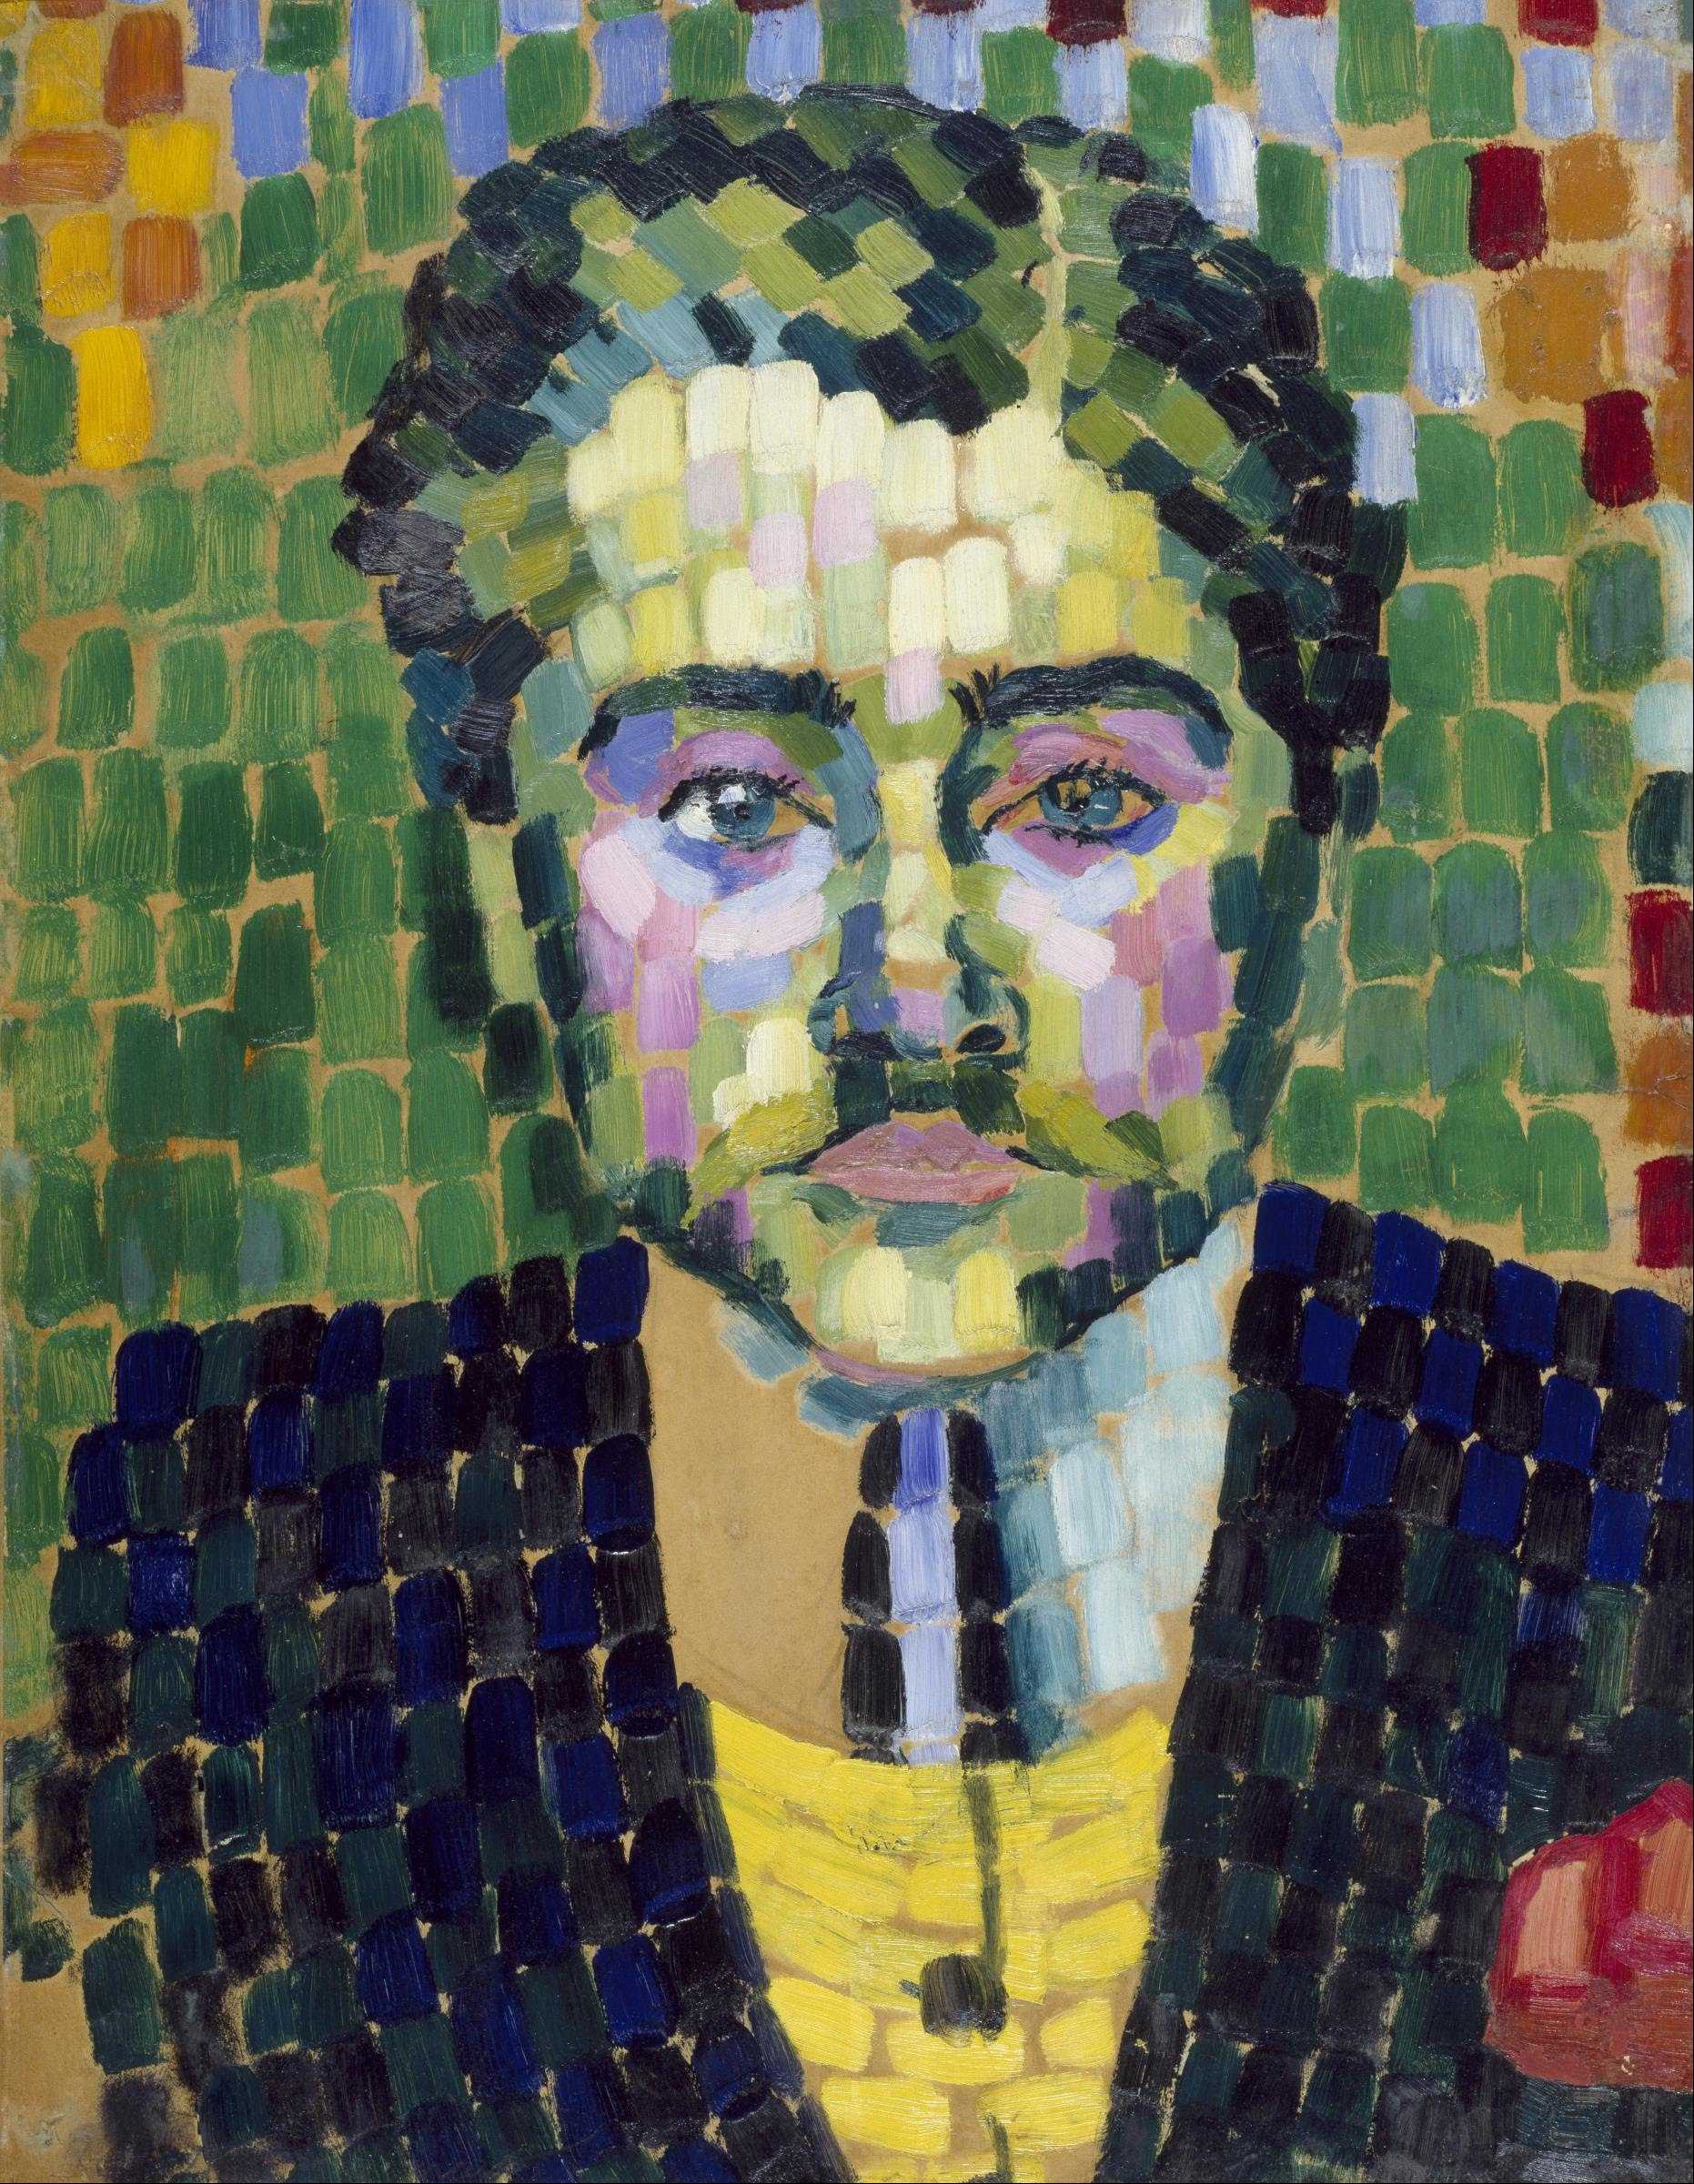 Find out more about Robert Delaunay - Jean Metzinger